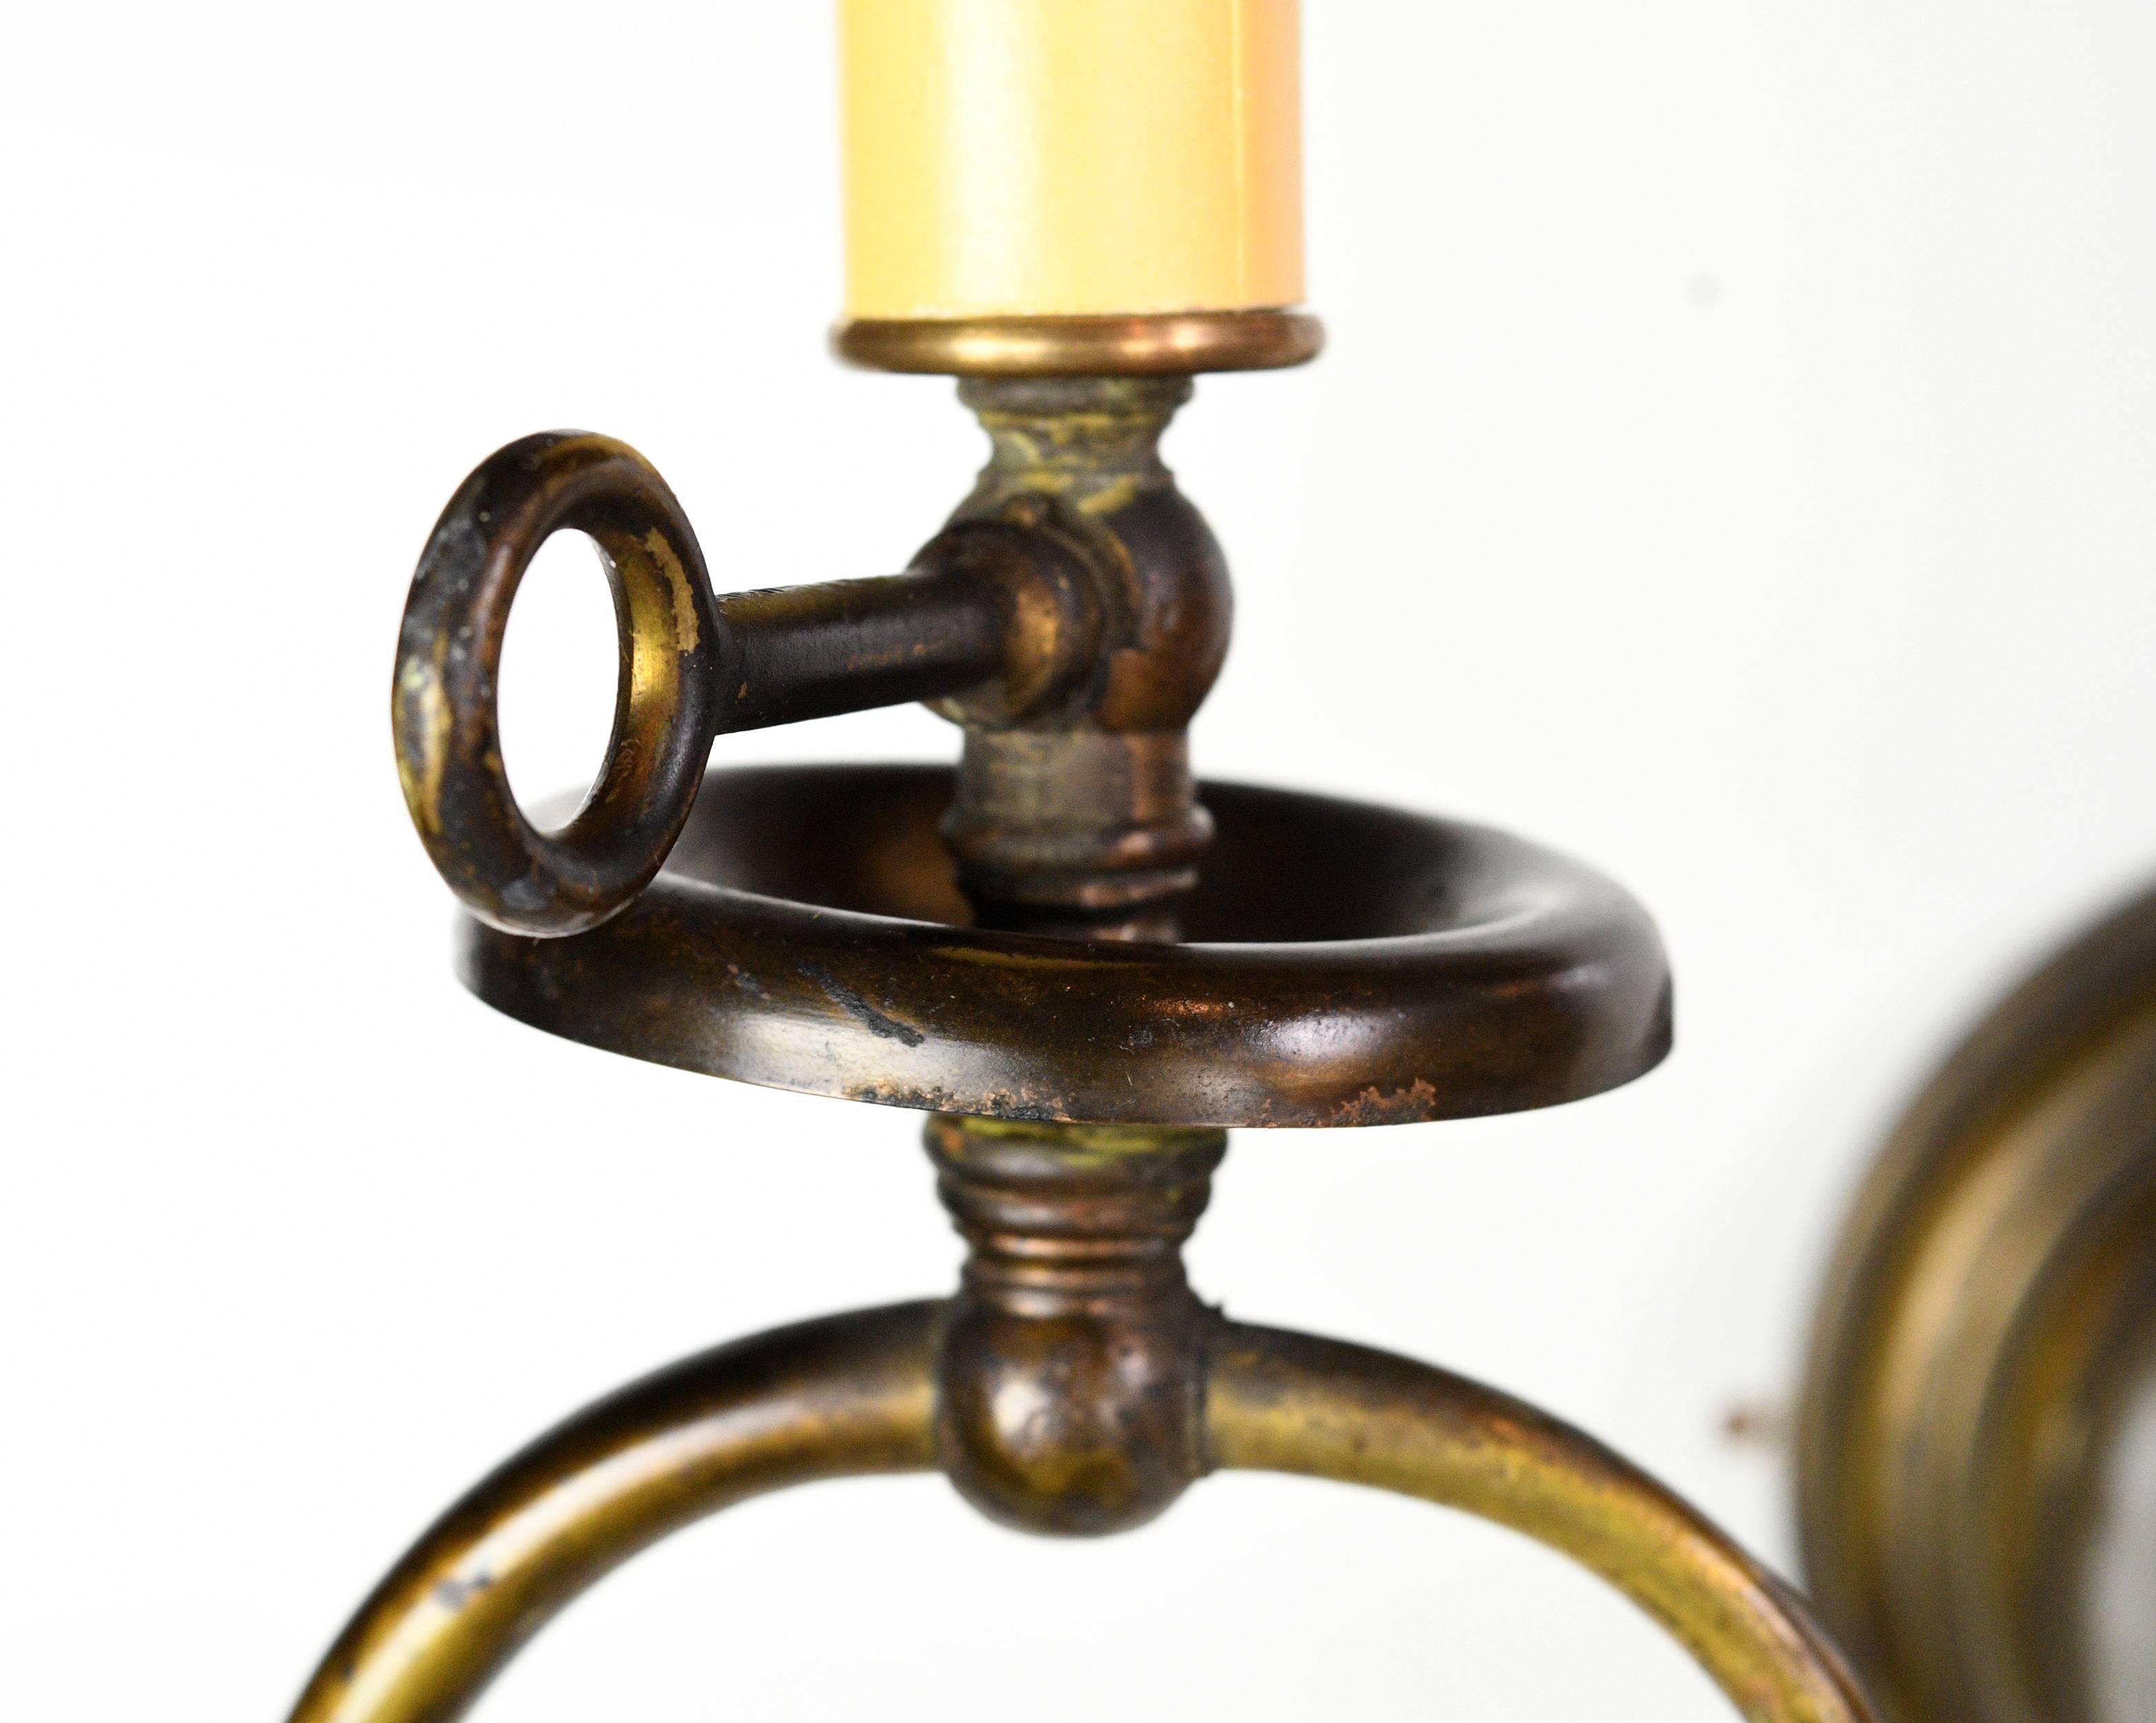 A very special brass sconce combining two types of lights. On one end there’s the candle light while the other end is a electric light with beautiful glass shade. While the light is asymmetrical, the visual weight is well balanced. The design